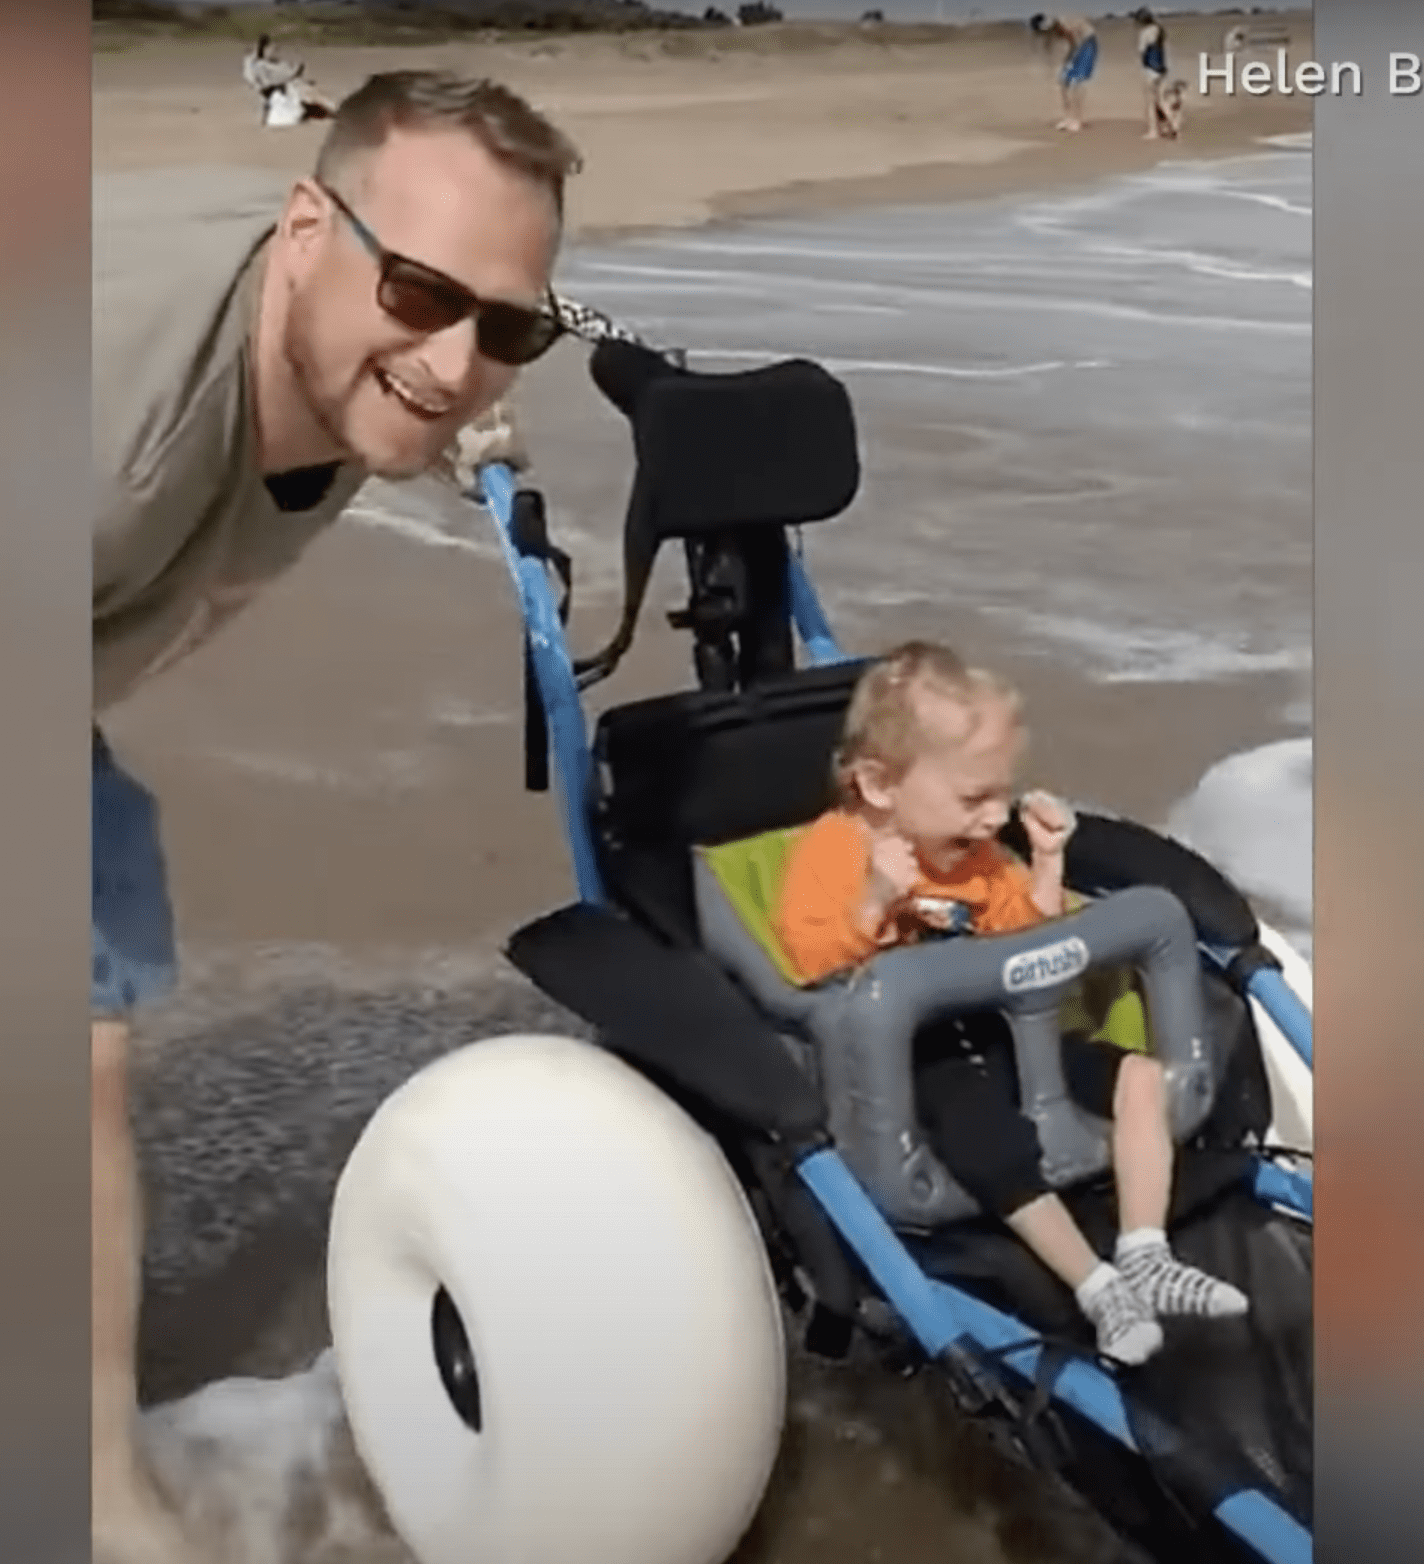 Joey Leathwood's father smiles after seeing his son having fun at the seaside. | Source: facebook.com/CBSNews